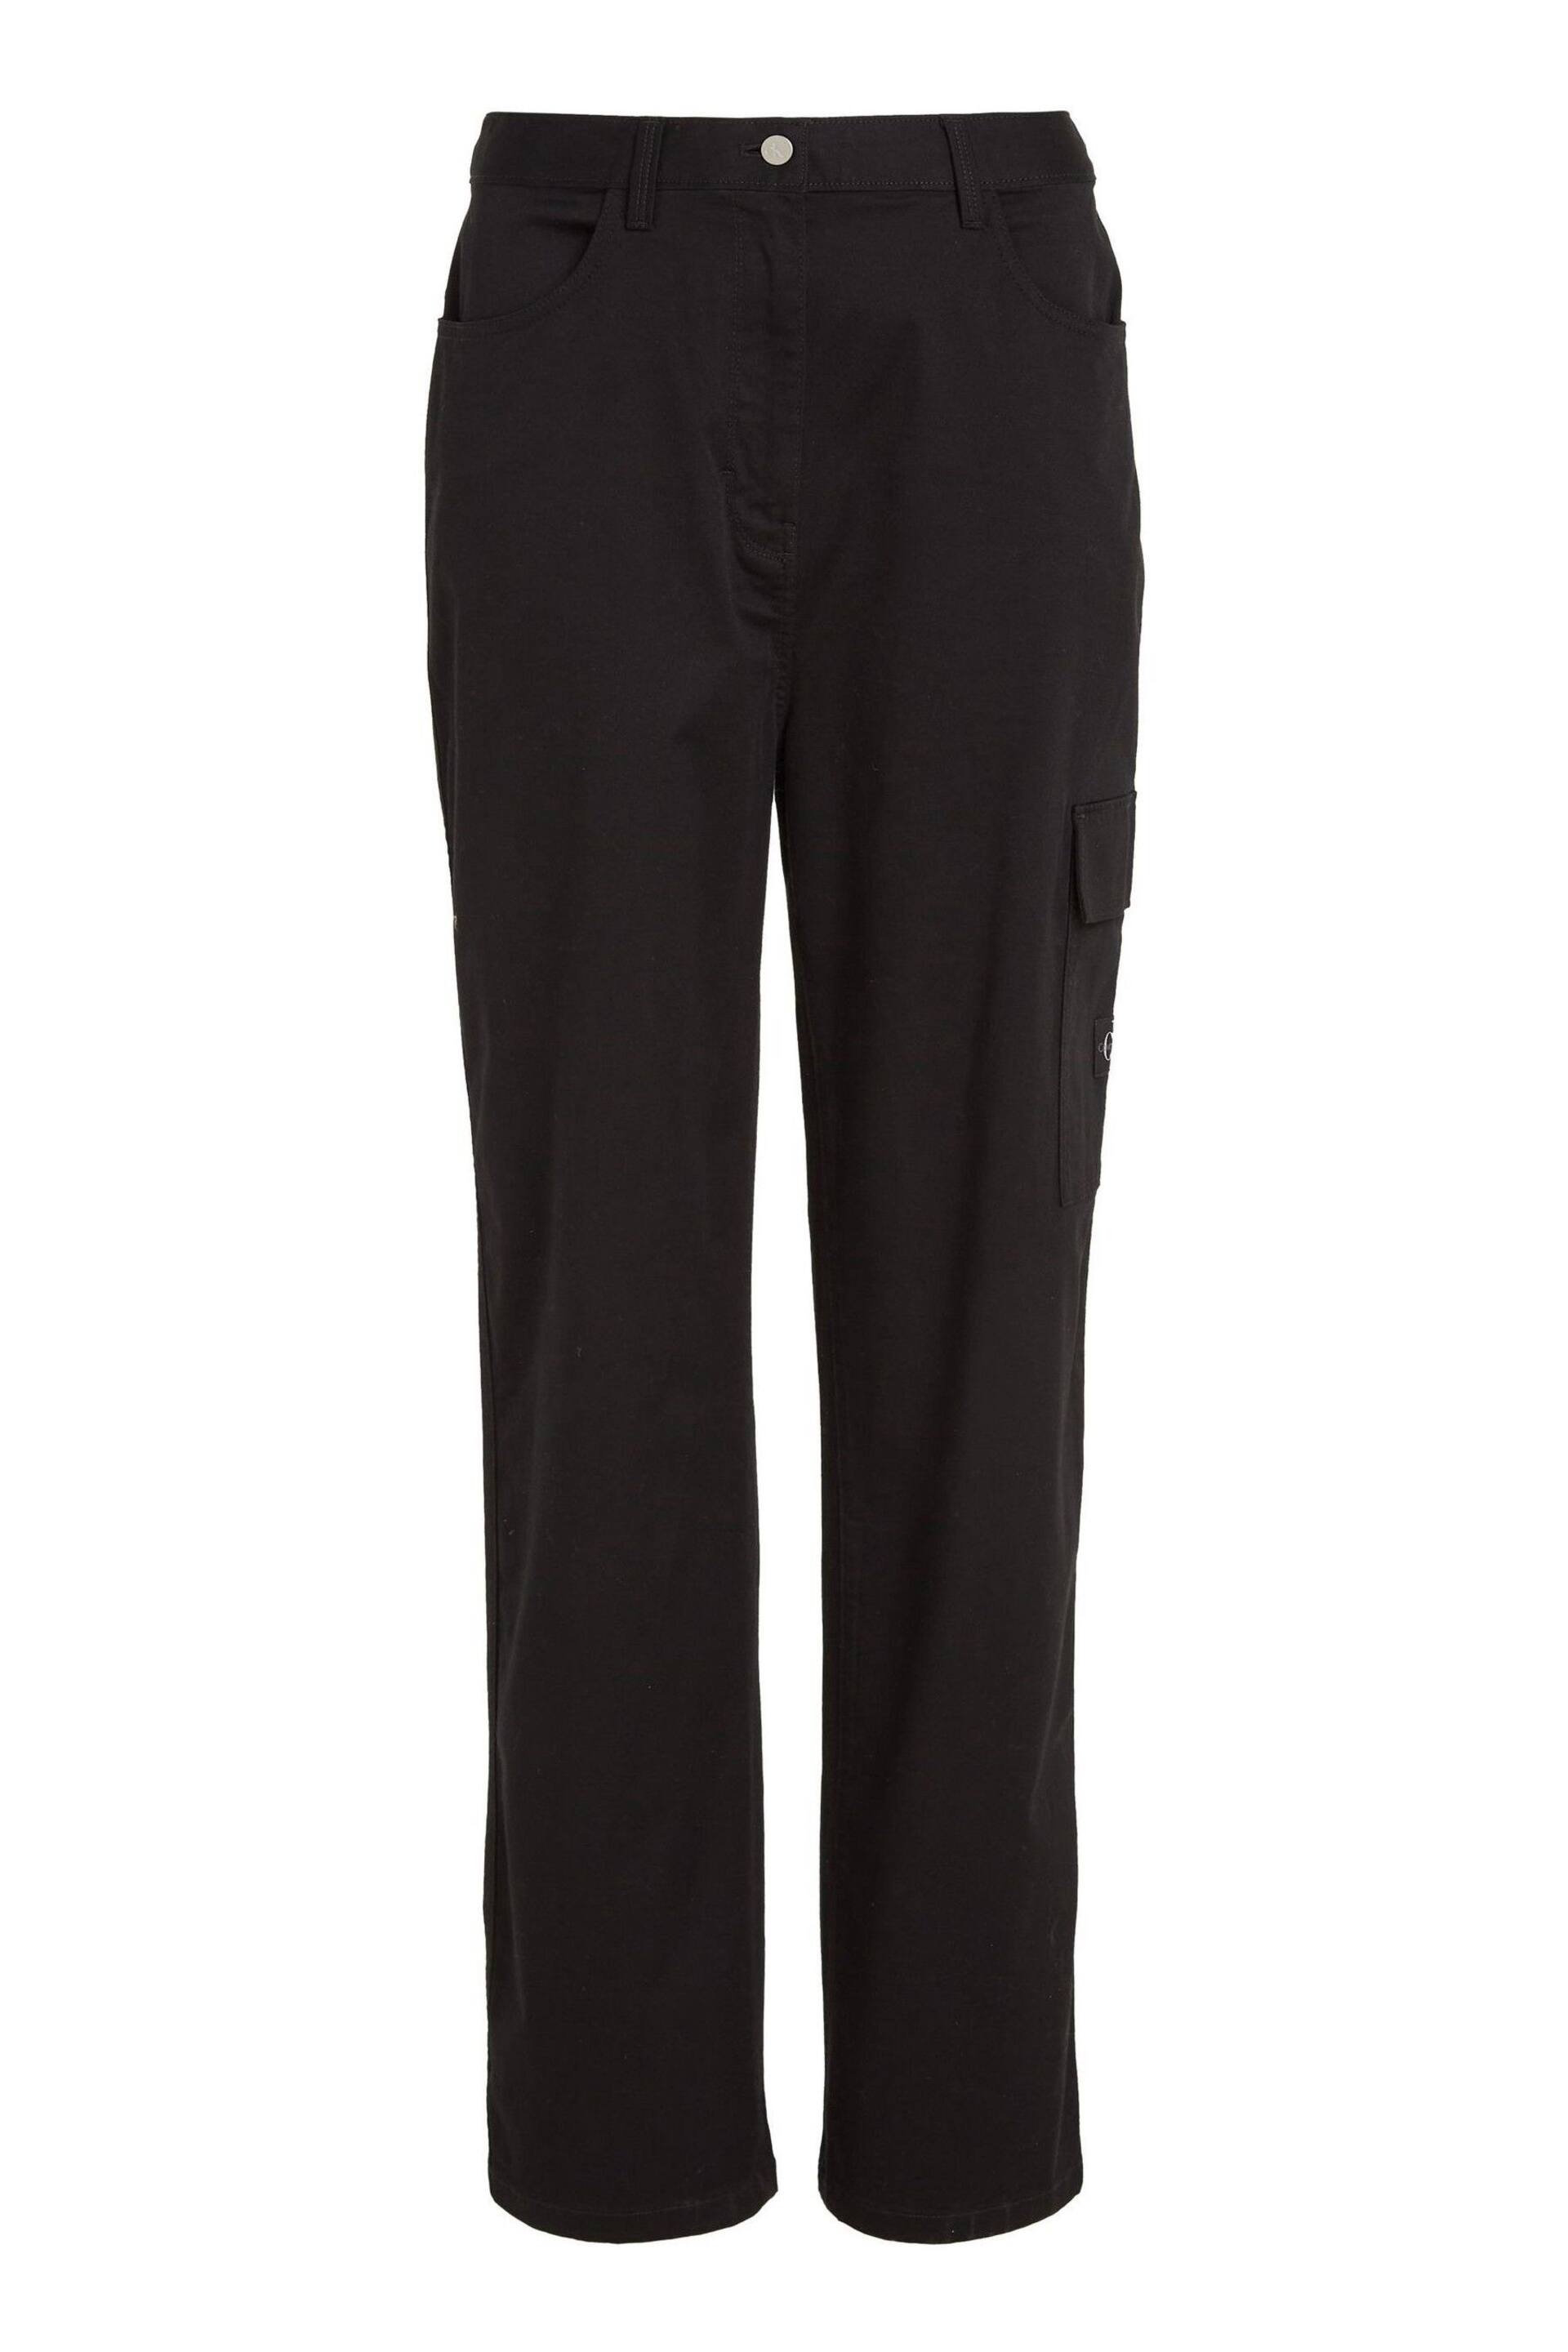 Calvin Klein Jeans High Rise Straight Twill Trousers - Image 4 of 6